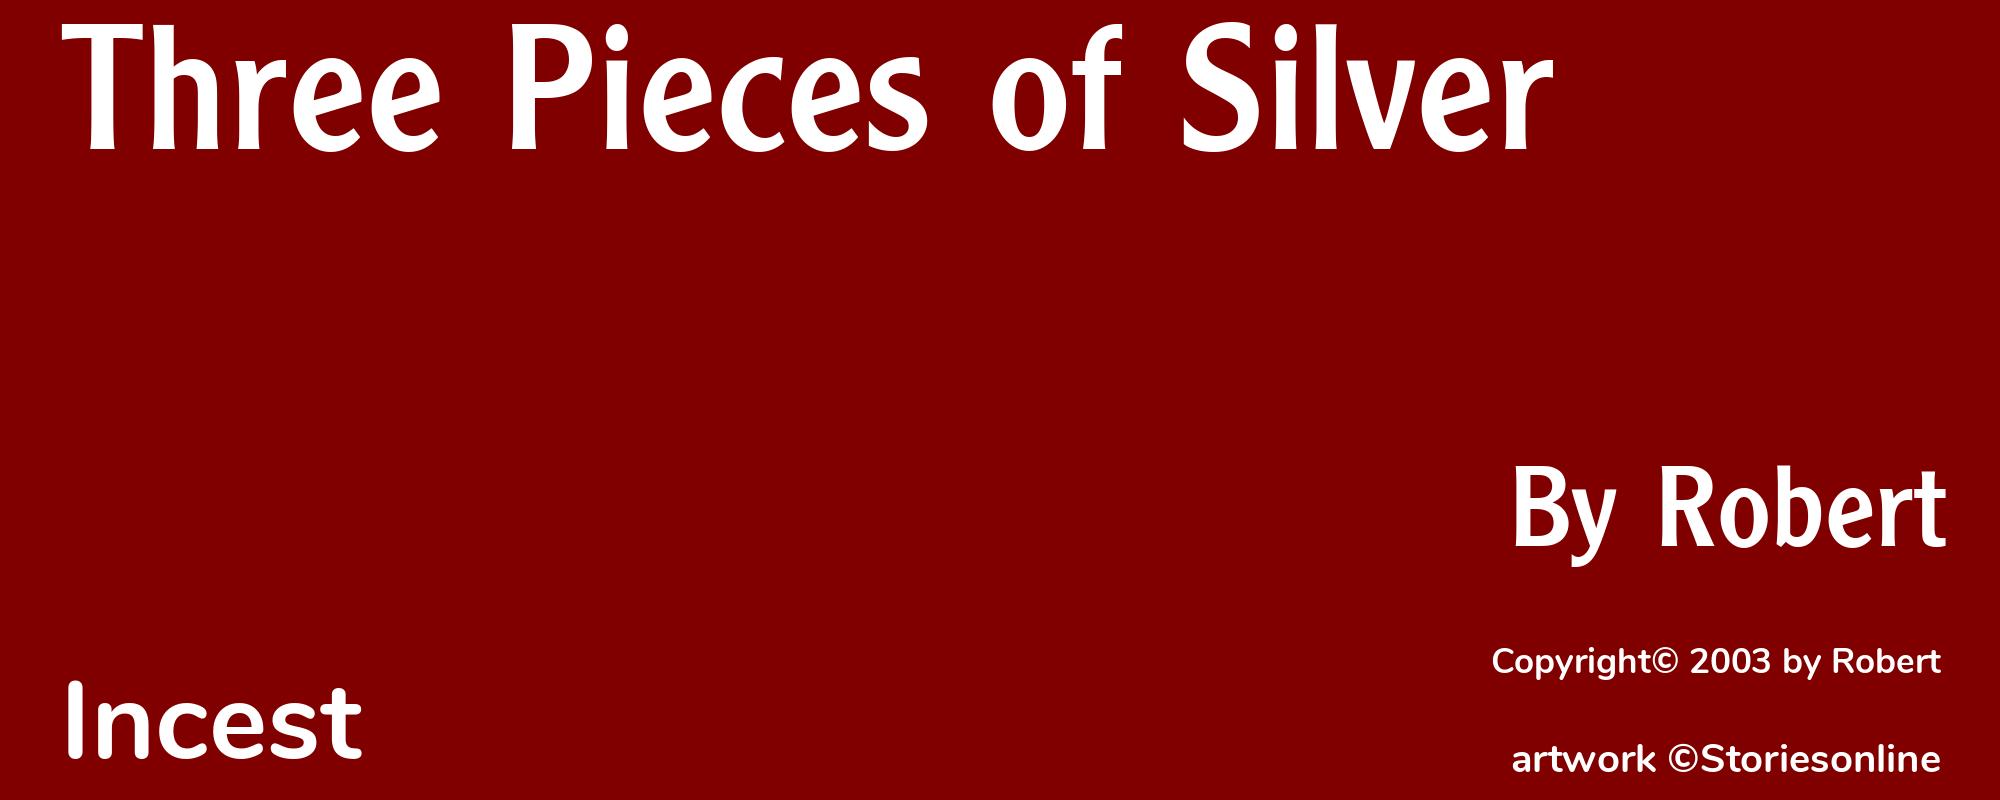 Three Pieces of Silver - Cover